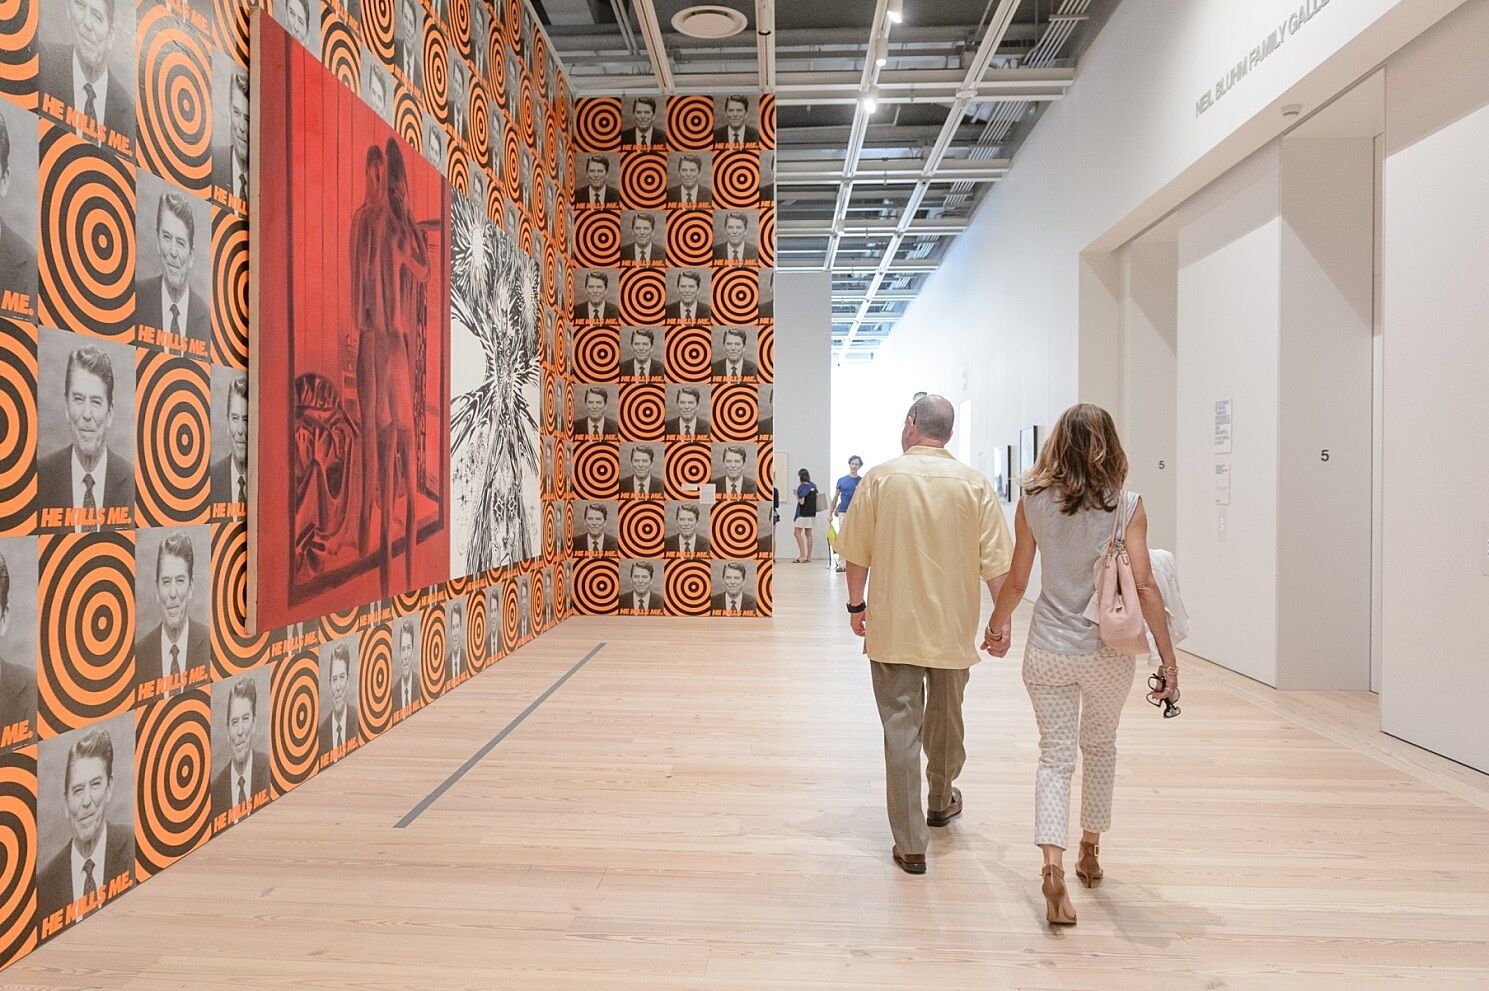 Two adults walks through a gallery during the event.